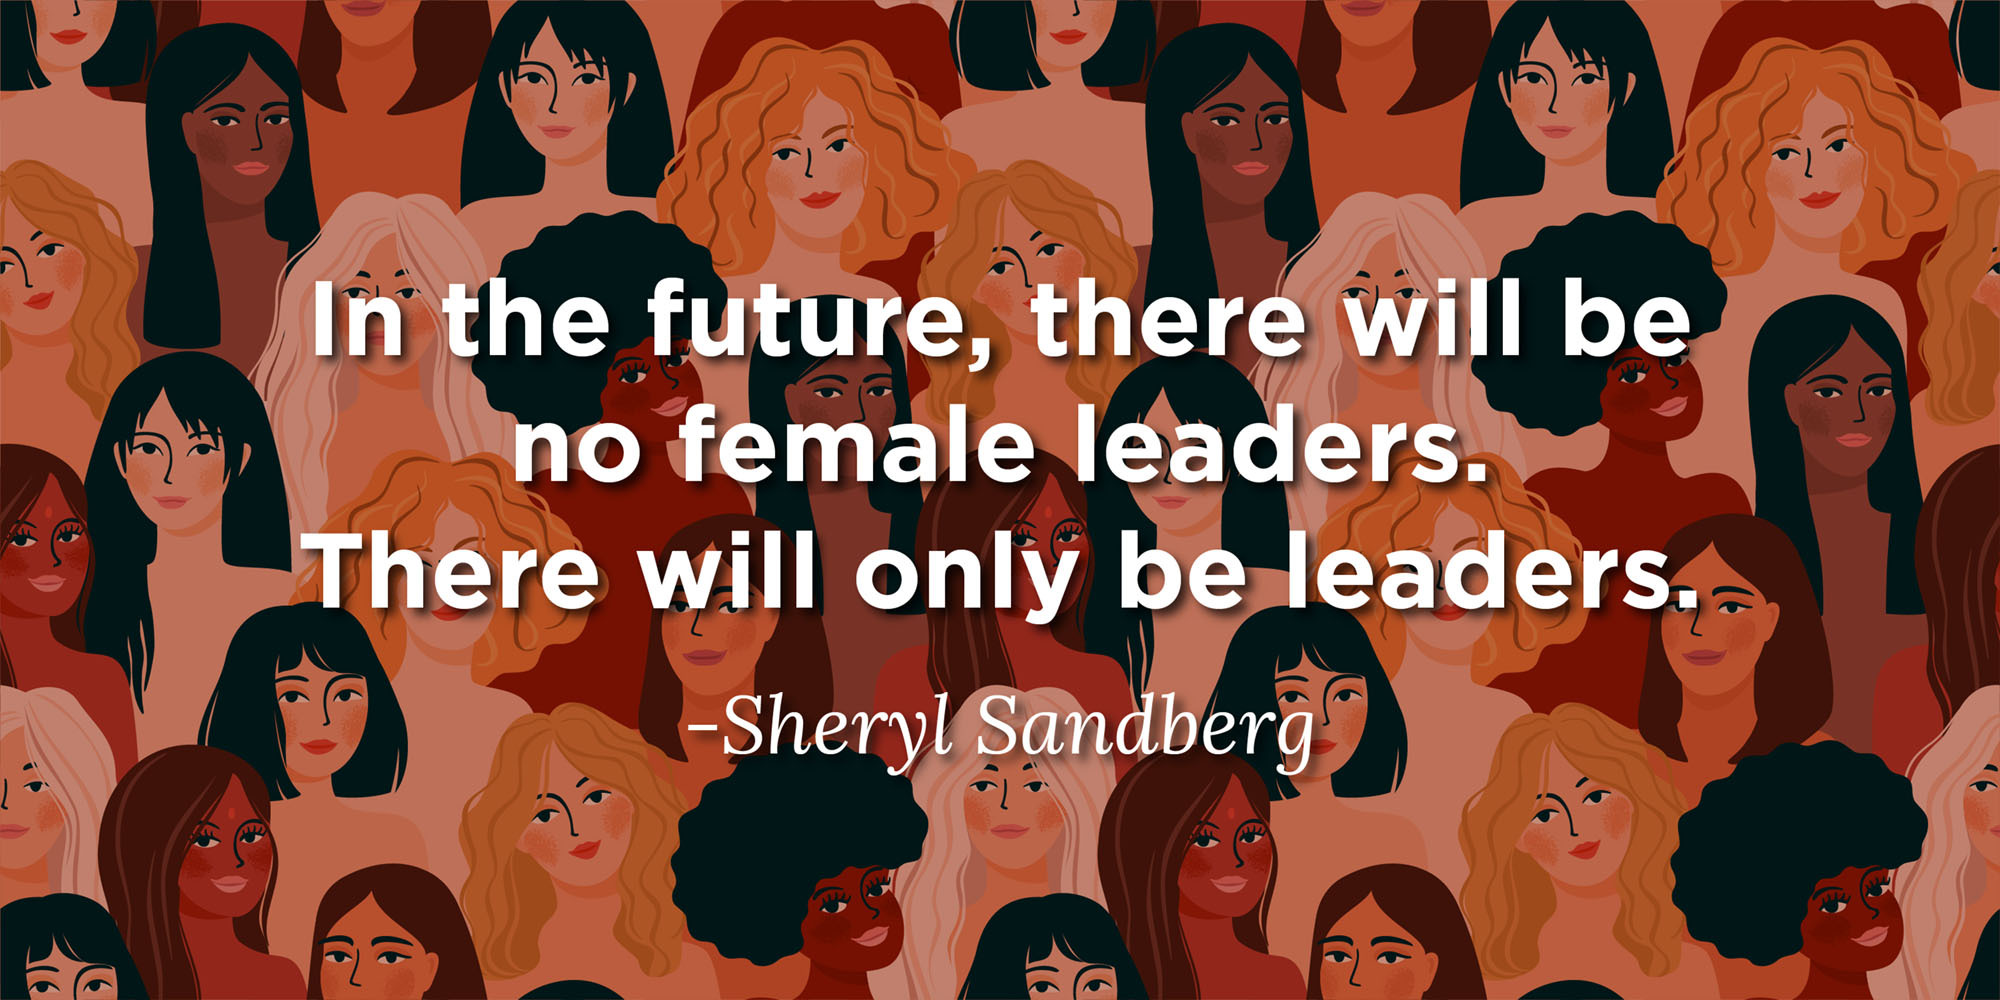 Image includes Sheryl Sandberg quote - "In the future, there will be no female leaders. There will only be leaders." Text appears on top of a background of illustrated women.